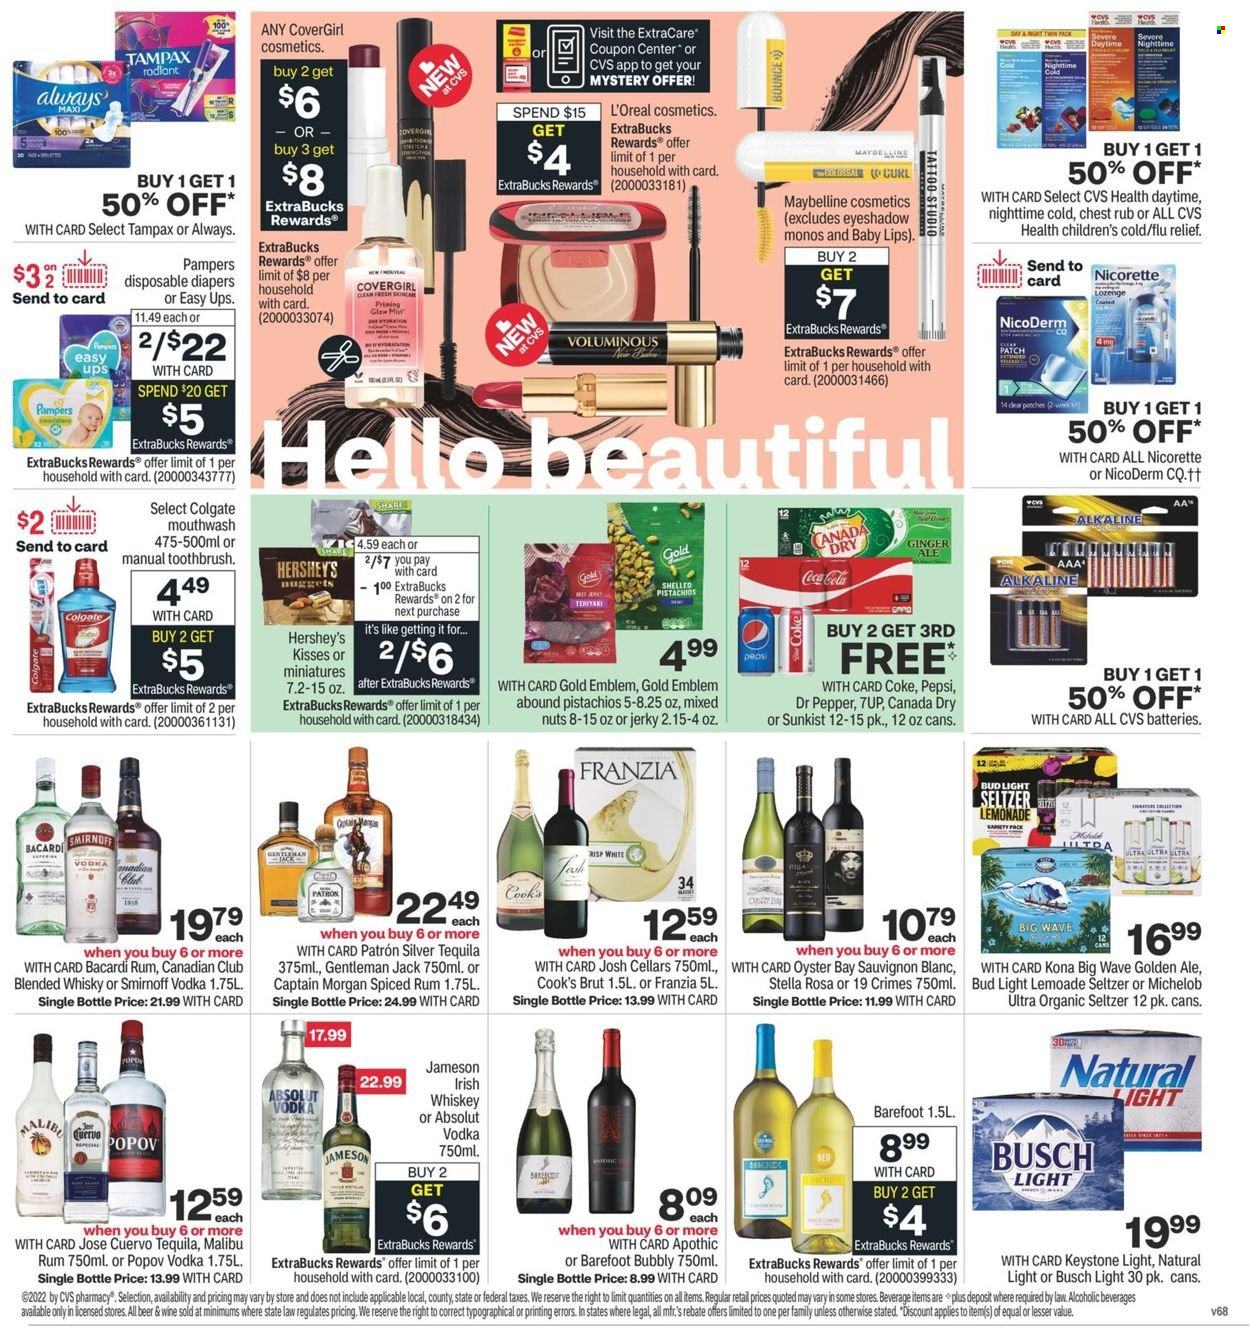 thumbnail - CVS Pharmacy Flyer - 01/09/2022 - 01/15/2022 - Sales products - nuggets, jerky, Hershey's, pistachios, mixed nuts, Canada Dry, Coca-Cola, lemonade, Pepsi, Dr. Pepper, 7UP, white wine, wine, Sauvignon Blanc, Bacardi, Captain Morgan, rum, Smirnoff, spiced rum, tequila, vodka, whiskey, irish whiskey, Jameson, Absolut, Malibu, Hard Seltzer, whisky, Pampers, nappies, WAVE, Colgate, toothbrush, mouthwash, Tampax, L’Oréal, Maybelline, Brut, battery, NicoDerm, Nicorette, beer, Busch, Bud Light, Keystone, eyeshadow, Michelob. Page 2.